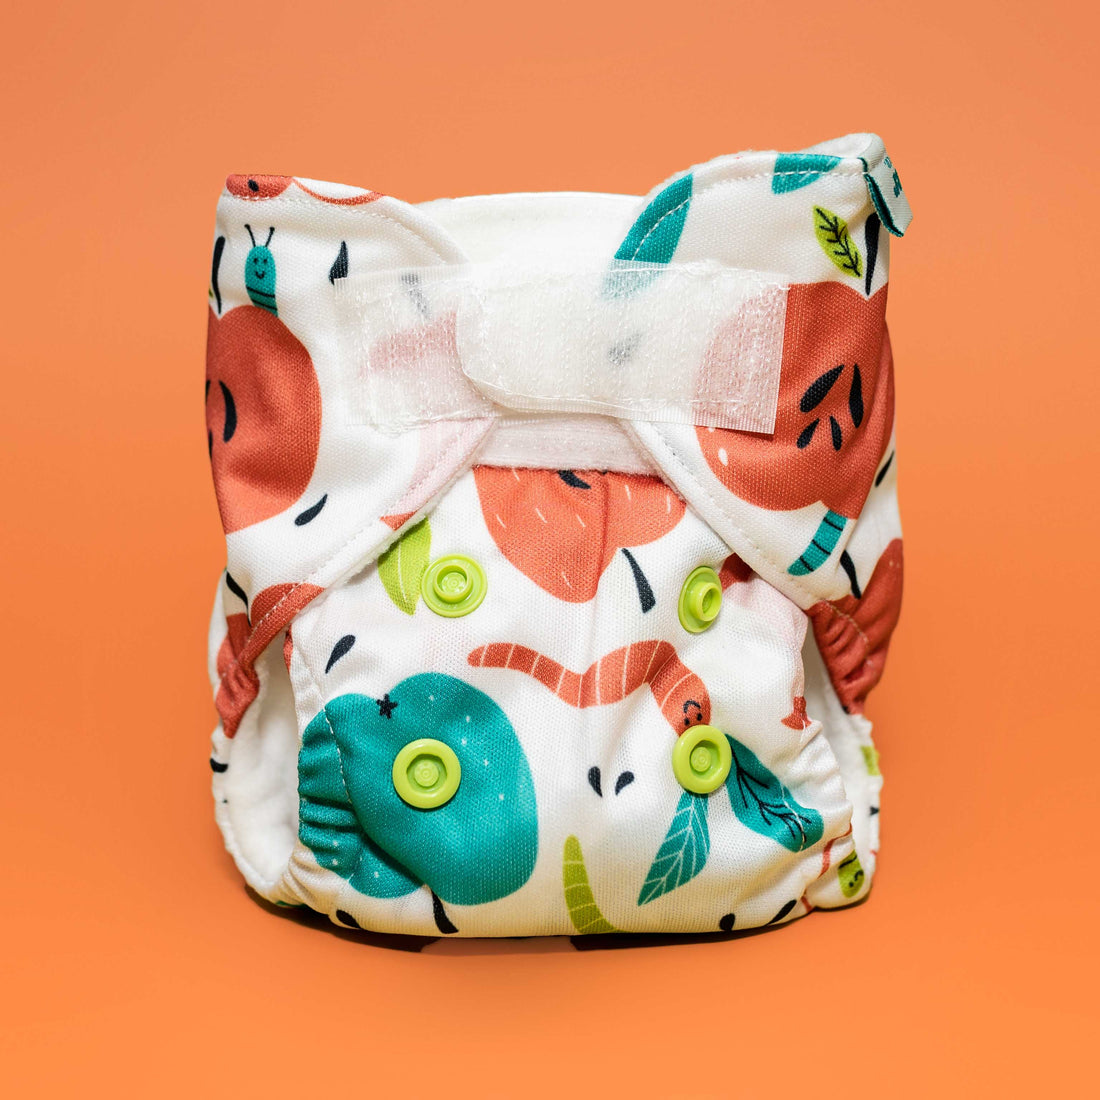 pretend play reusable doll baby diapers fits most dolls and stuffies machine washable cloth diaper apples worms whimsical playful print